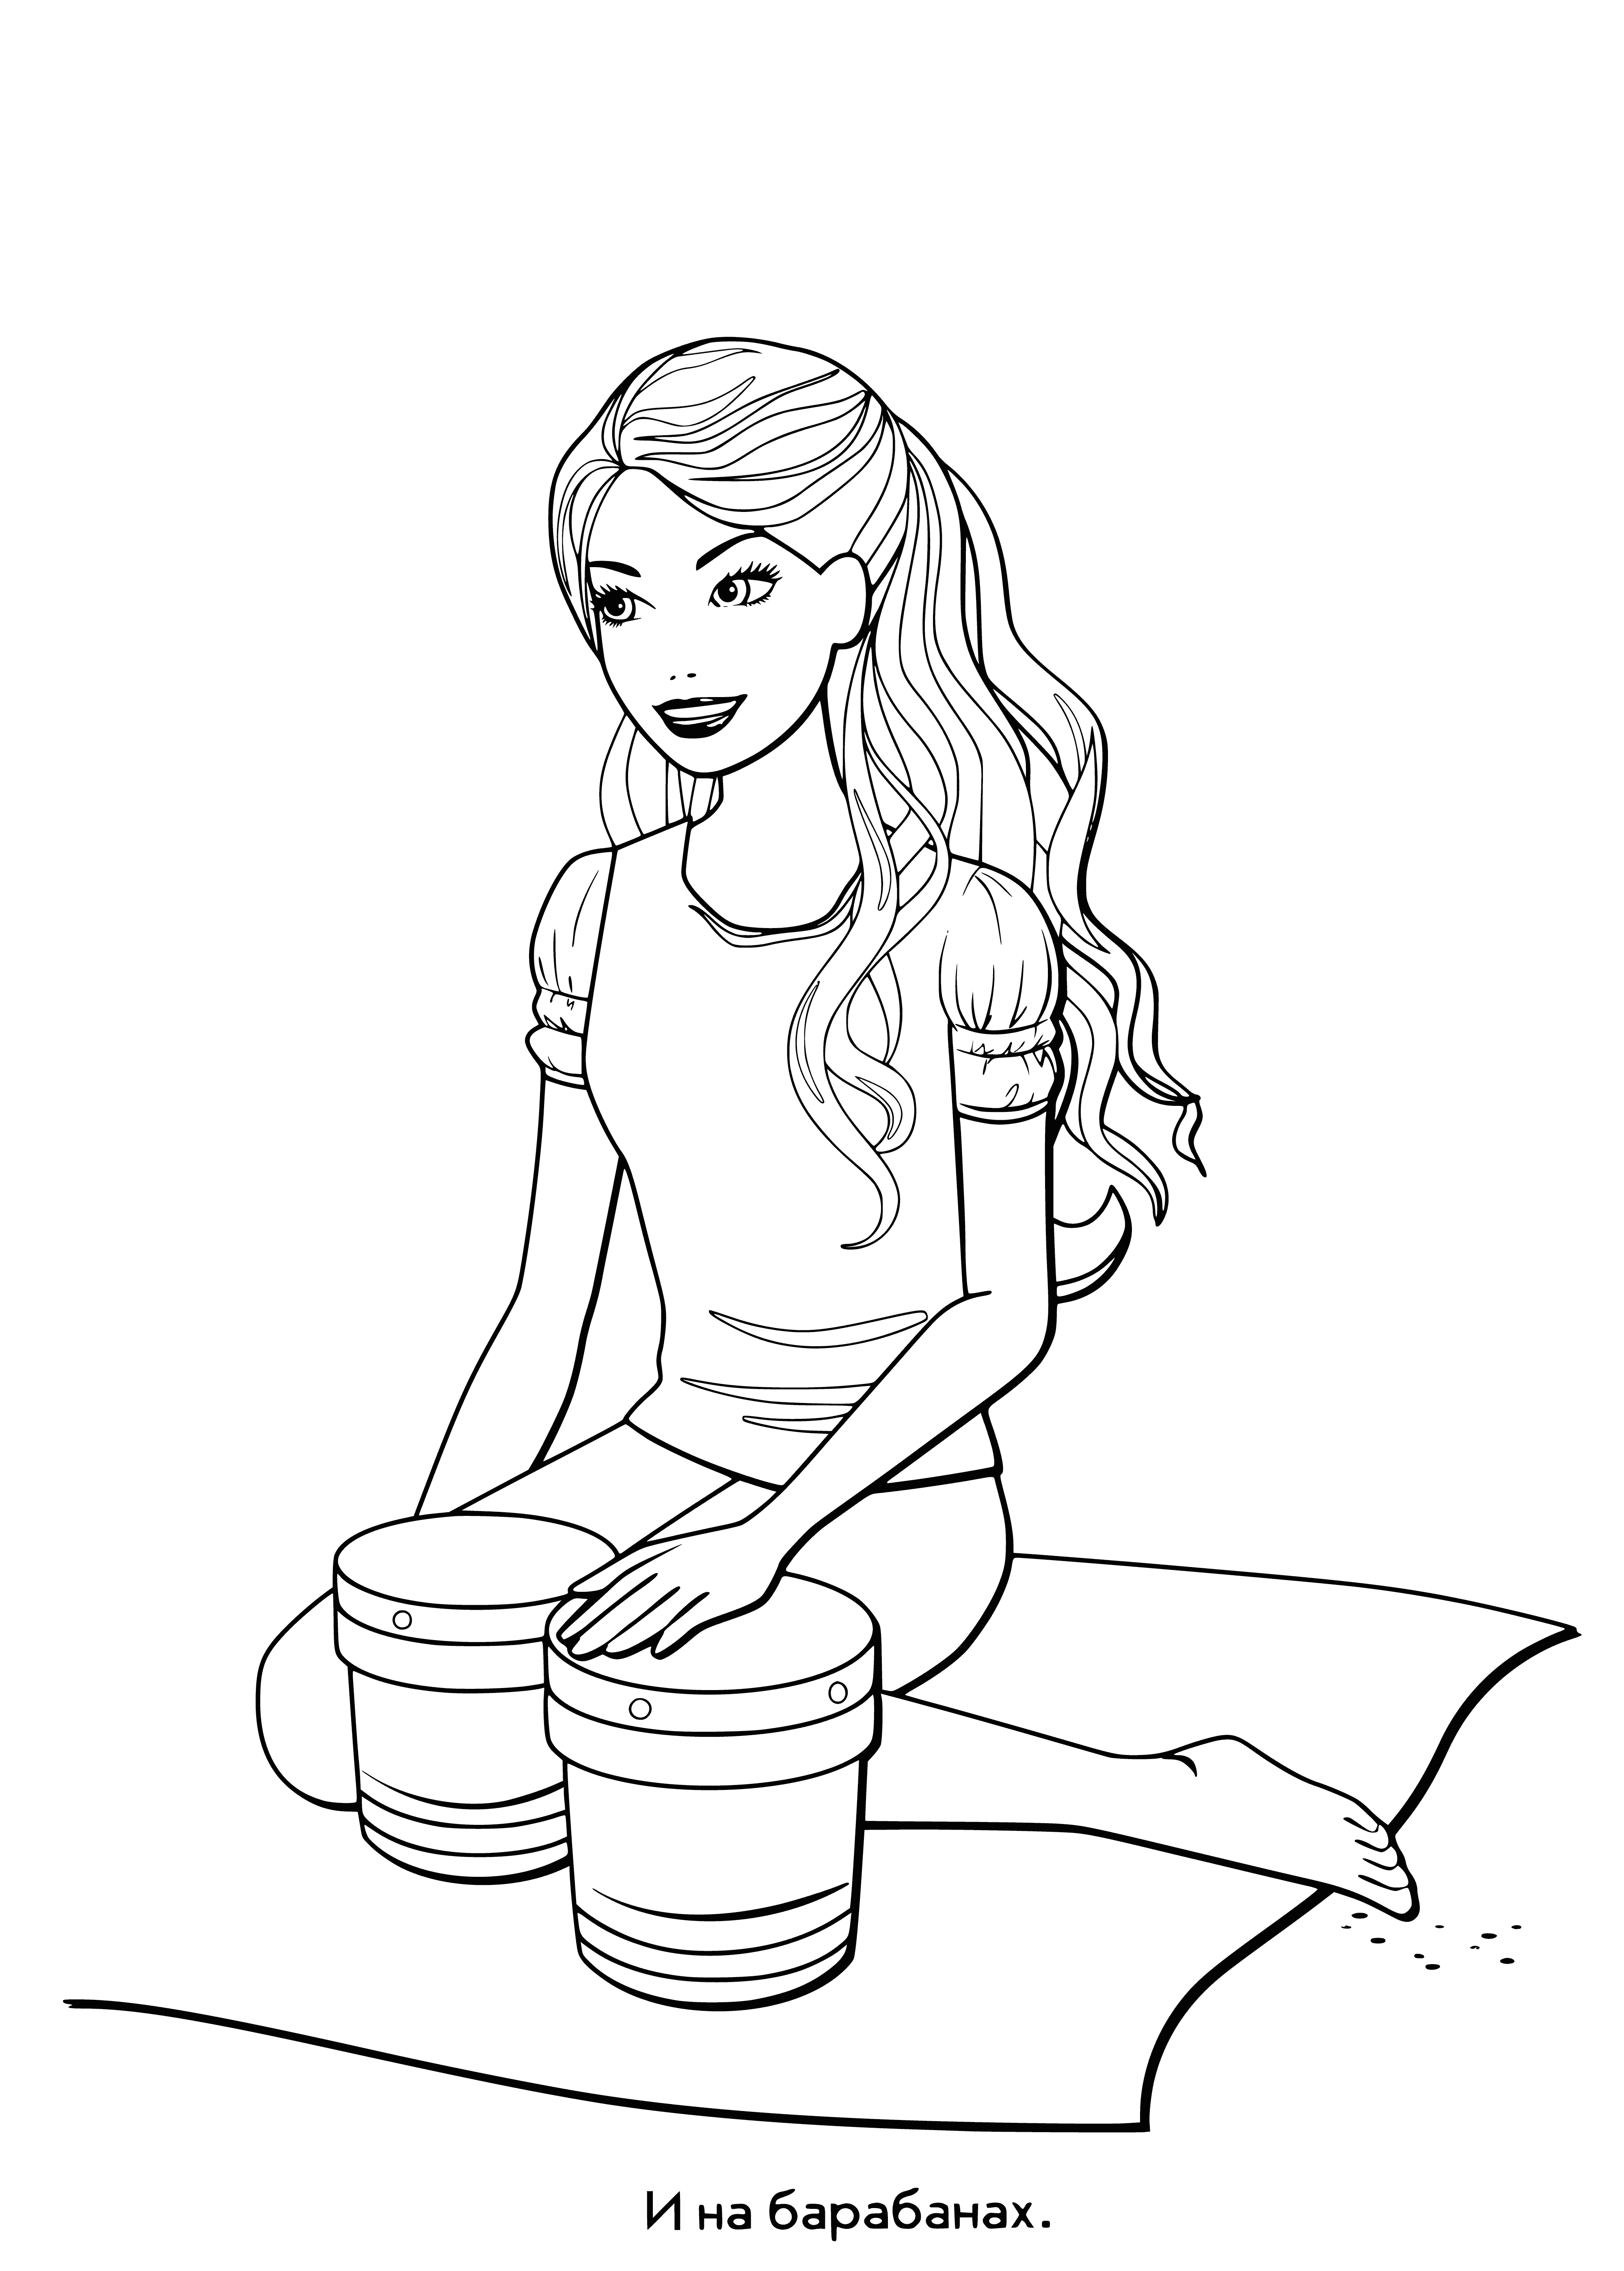 Barbie playing drums coloring page